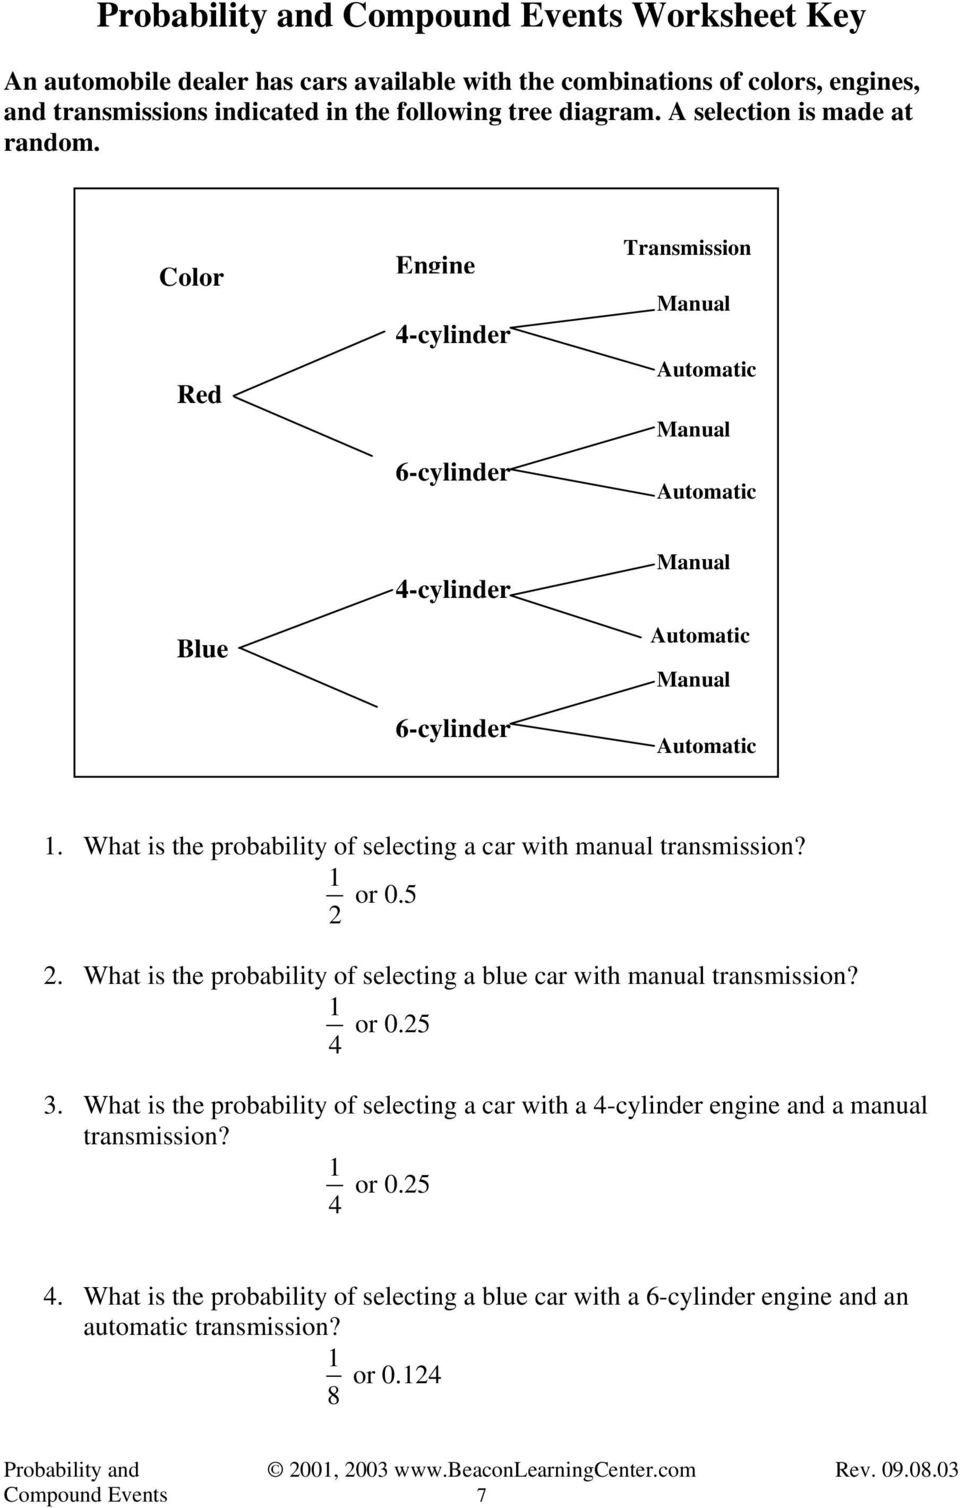 Probability And Compound Events   Pdf